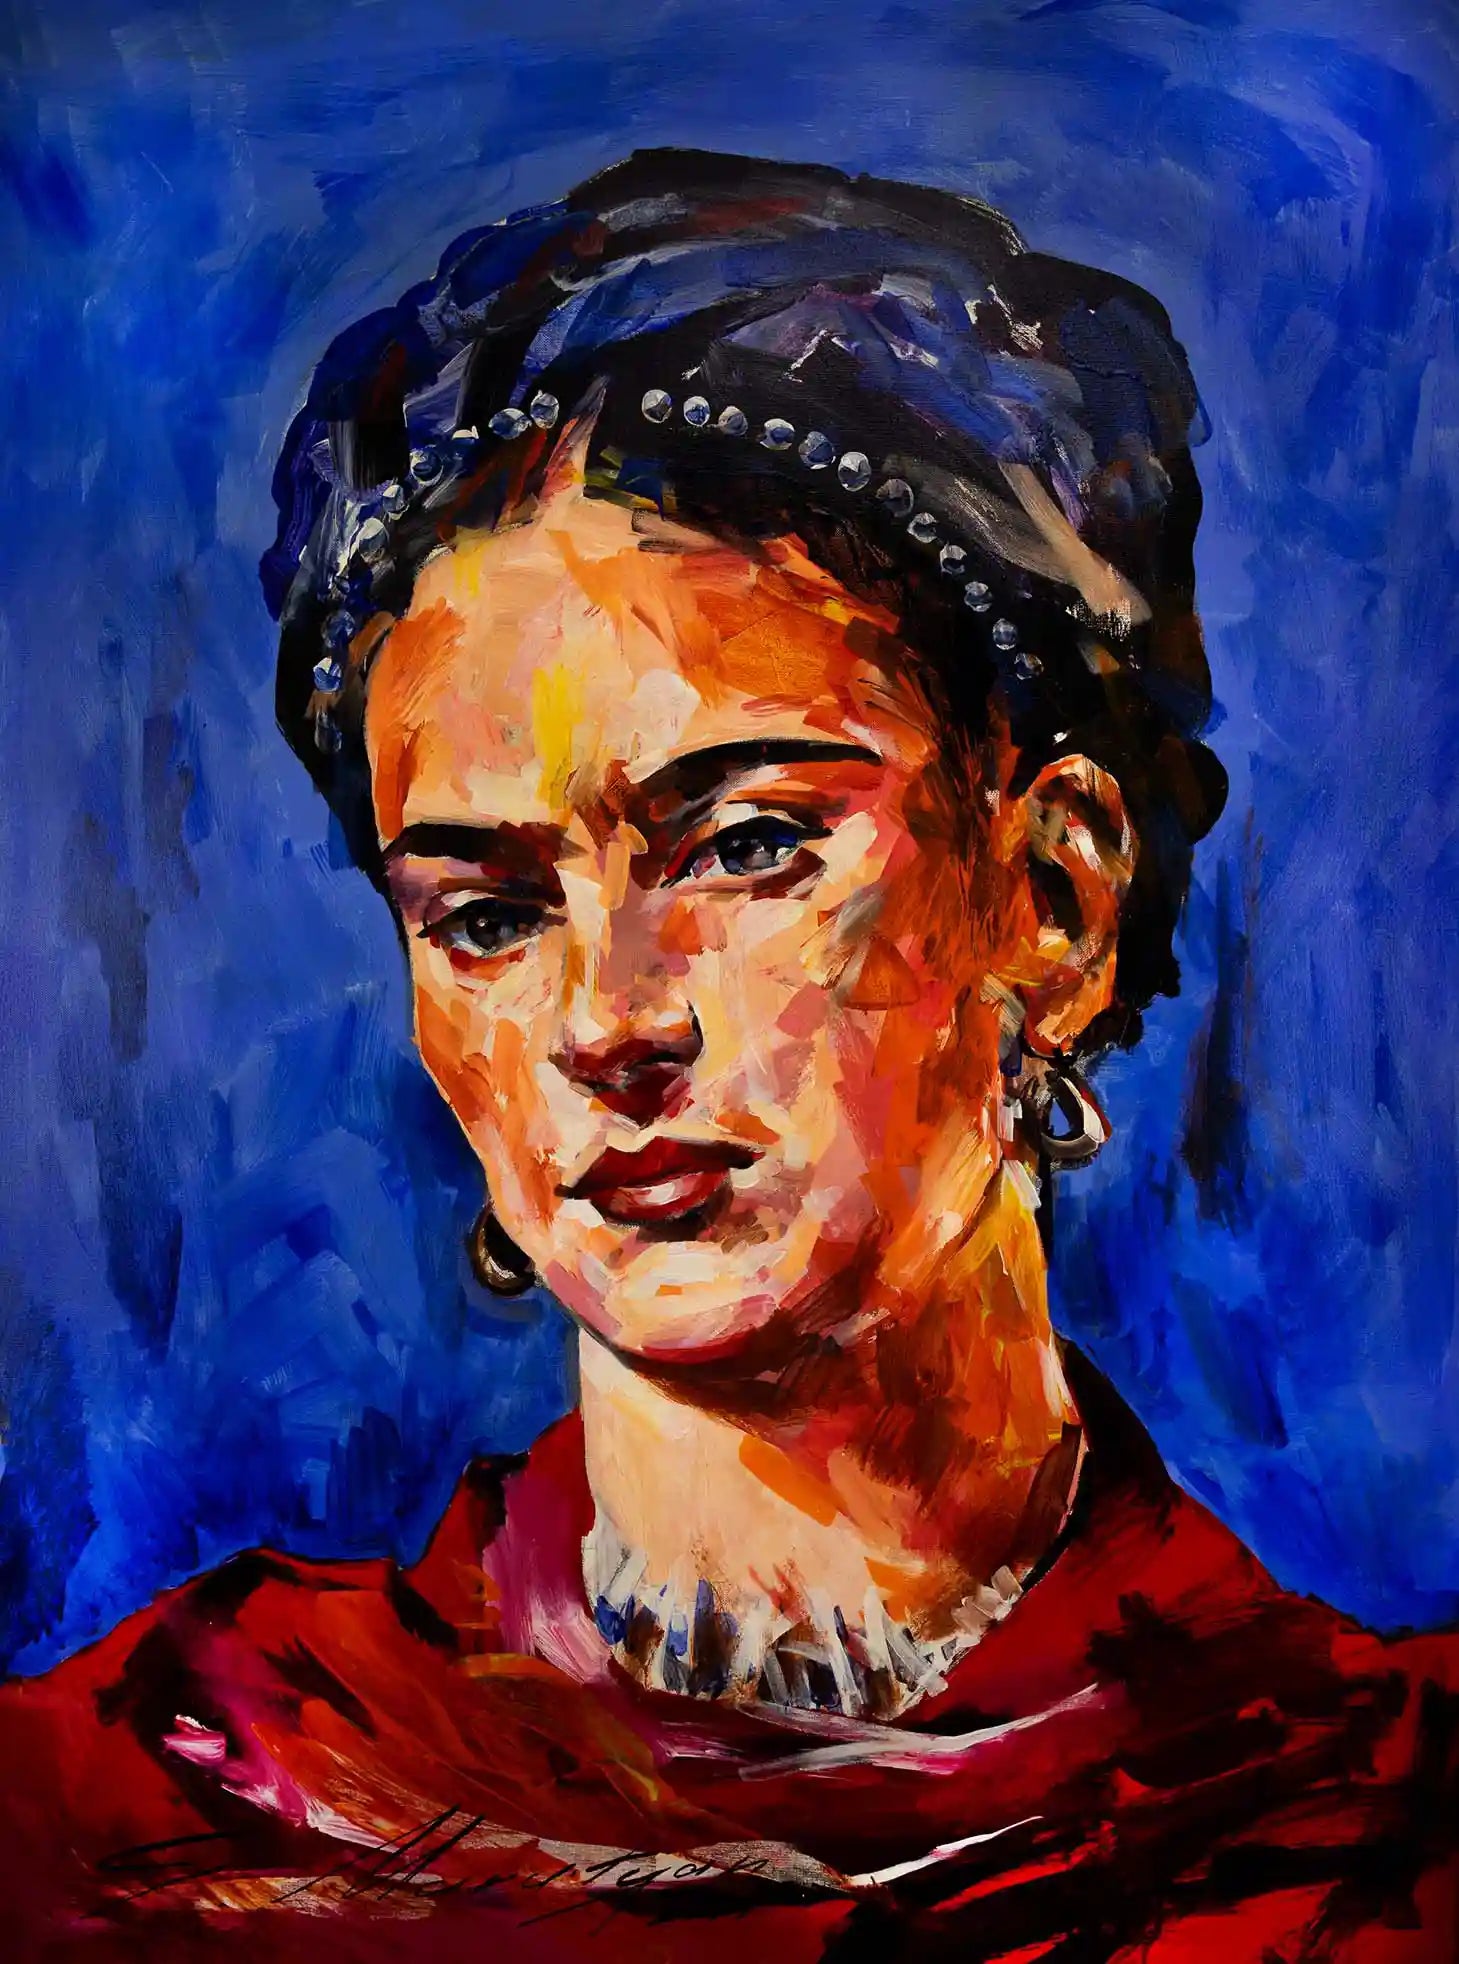 Frida Kahlo portrait by Armenian artist Samvel Marutyan. The artwork captures Kahlo's intense, deep eyes against a striking blue background, juxtaposed with her vibrant red dress. The harmonious interplay between the colors creates a compelling dialogue that draws the viewer in.